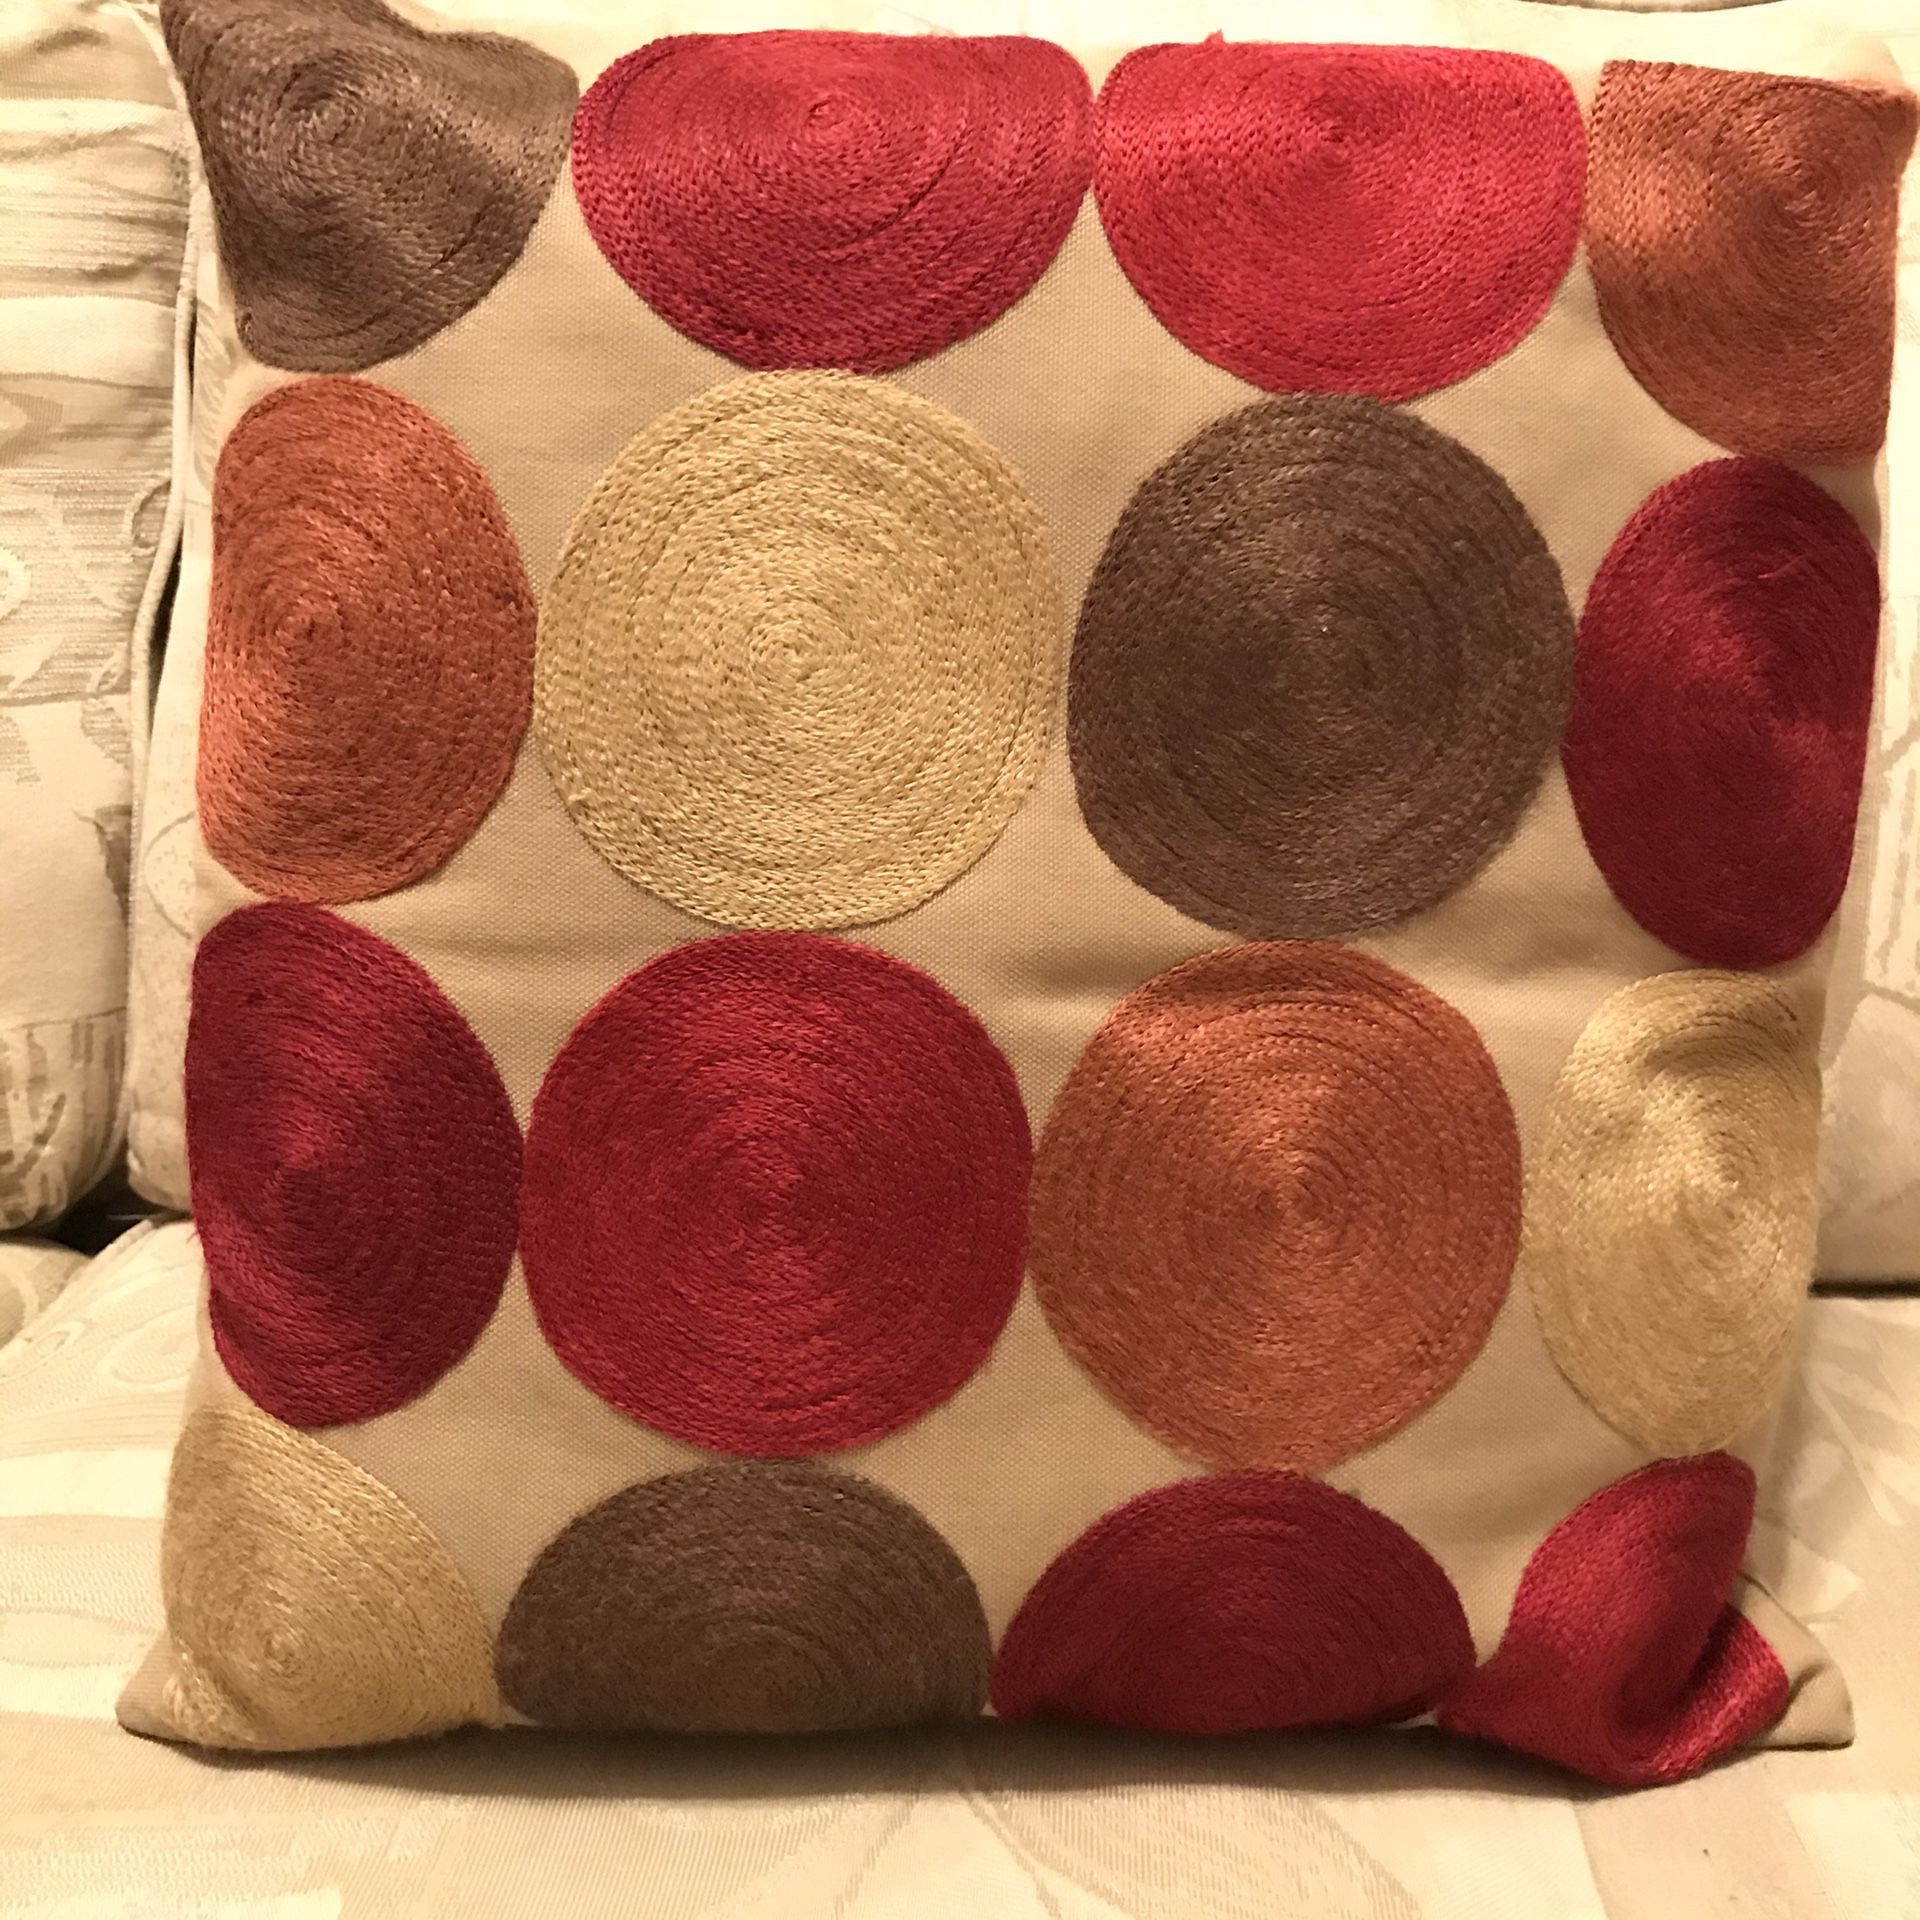 Really Cute and Nice Decorative Throw Pillows.